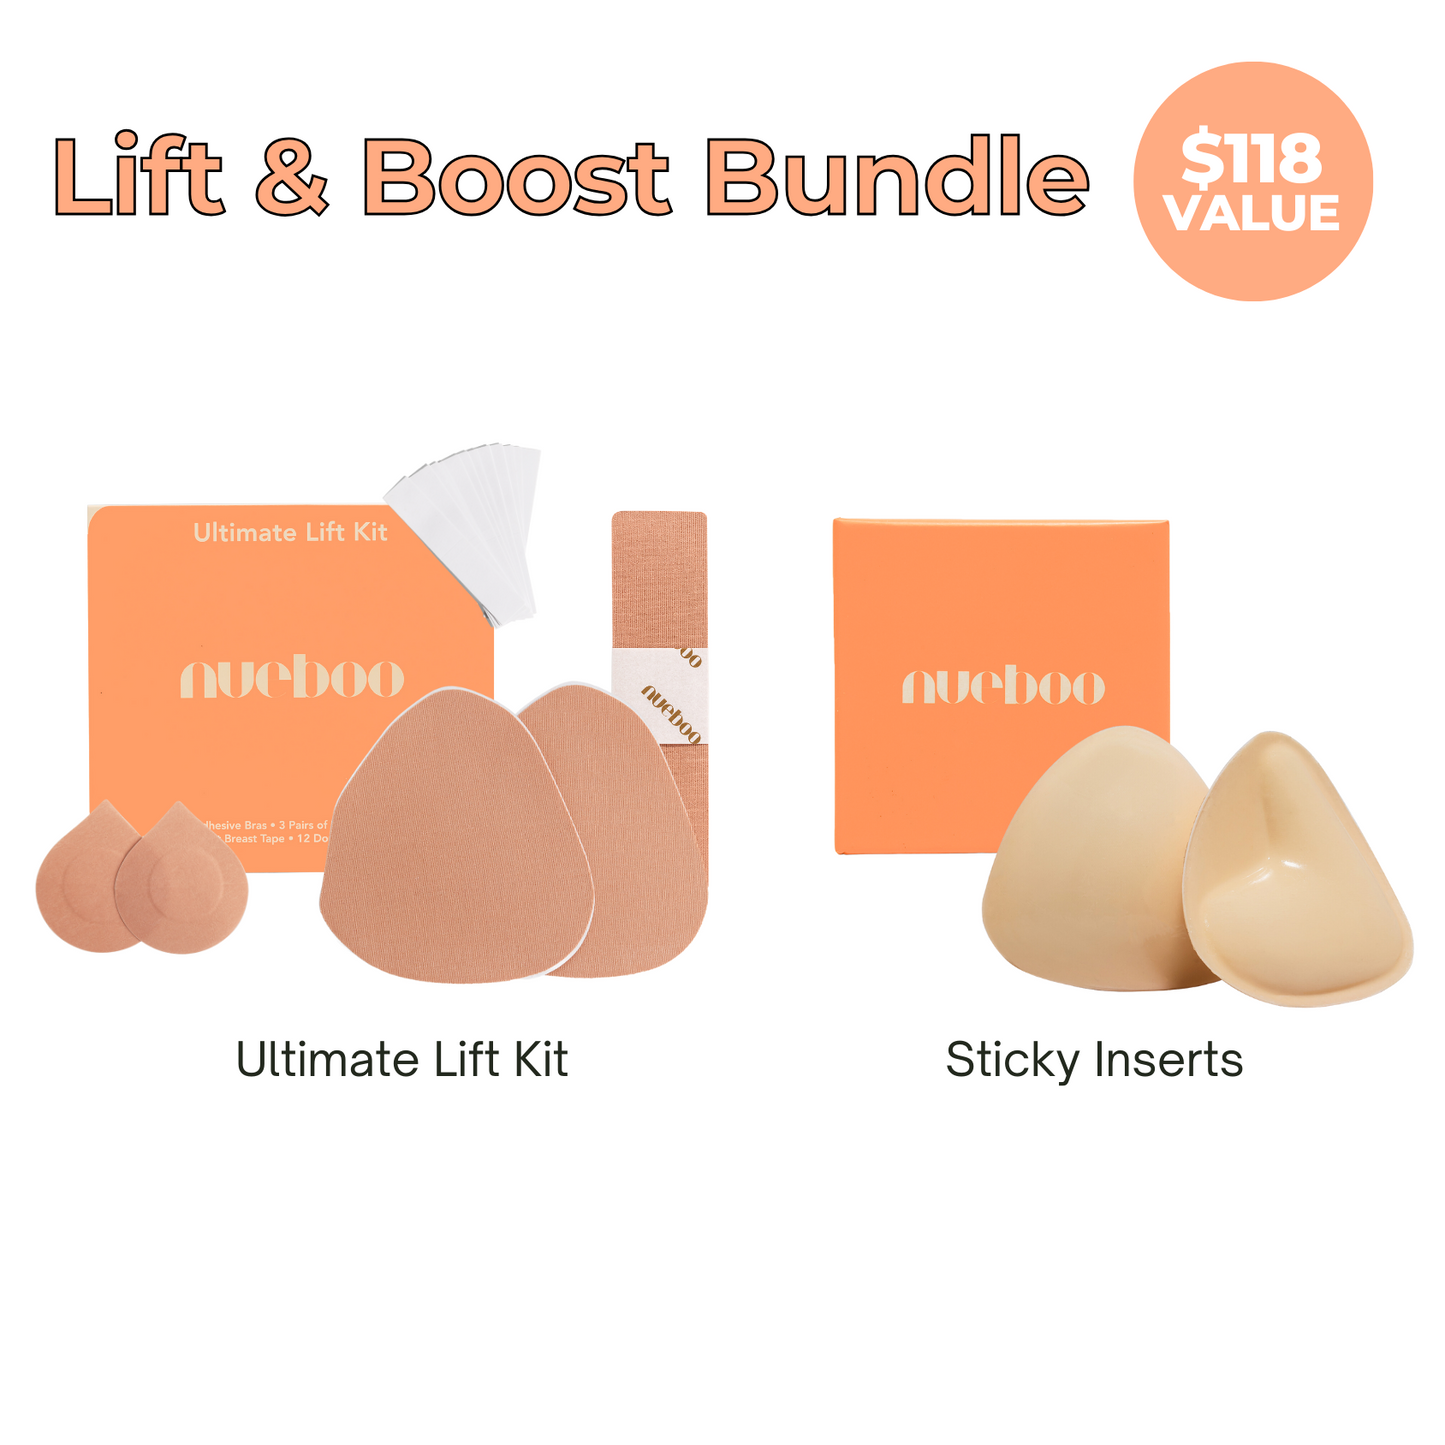 Lift and Boost Bundle